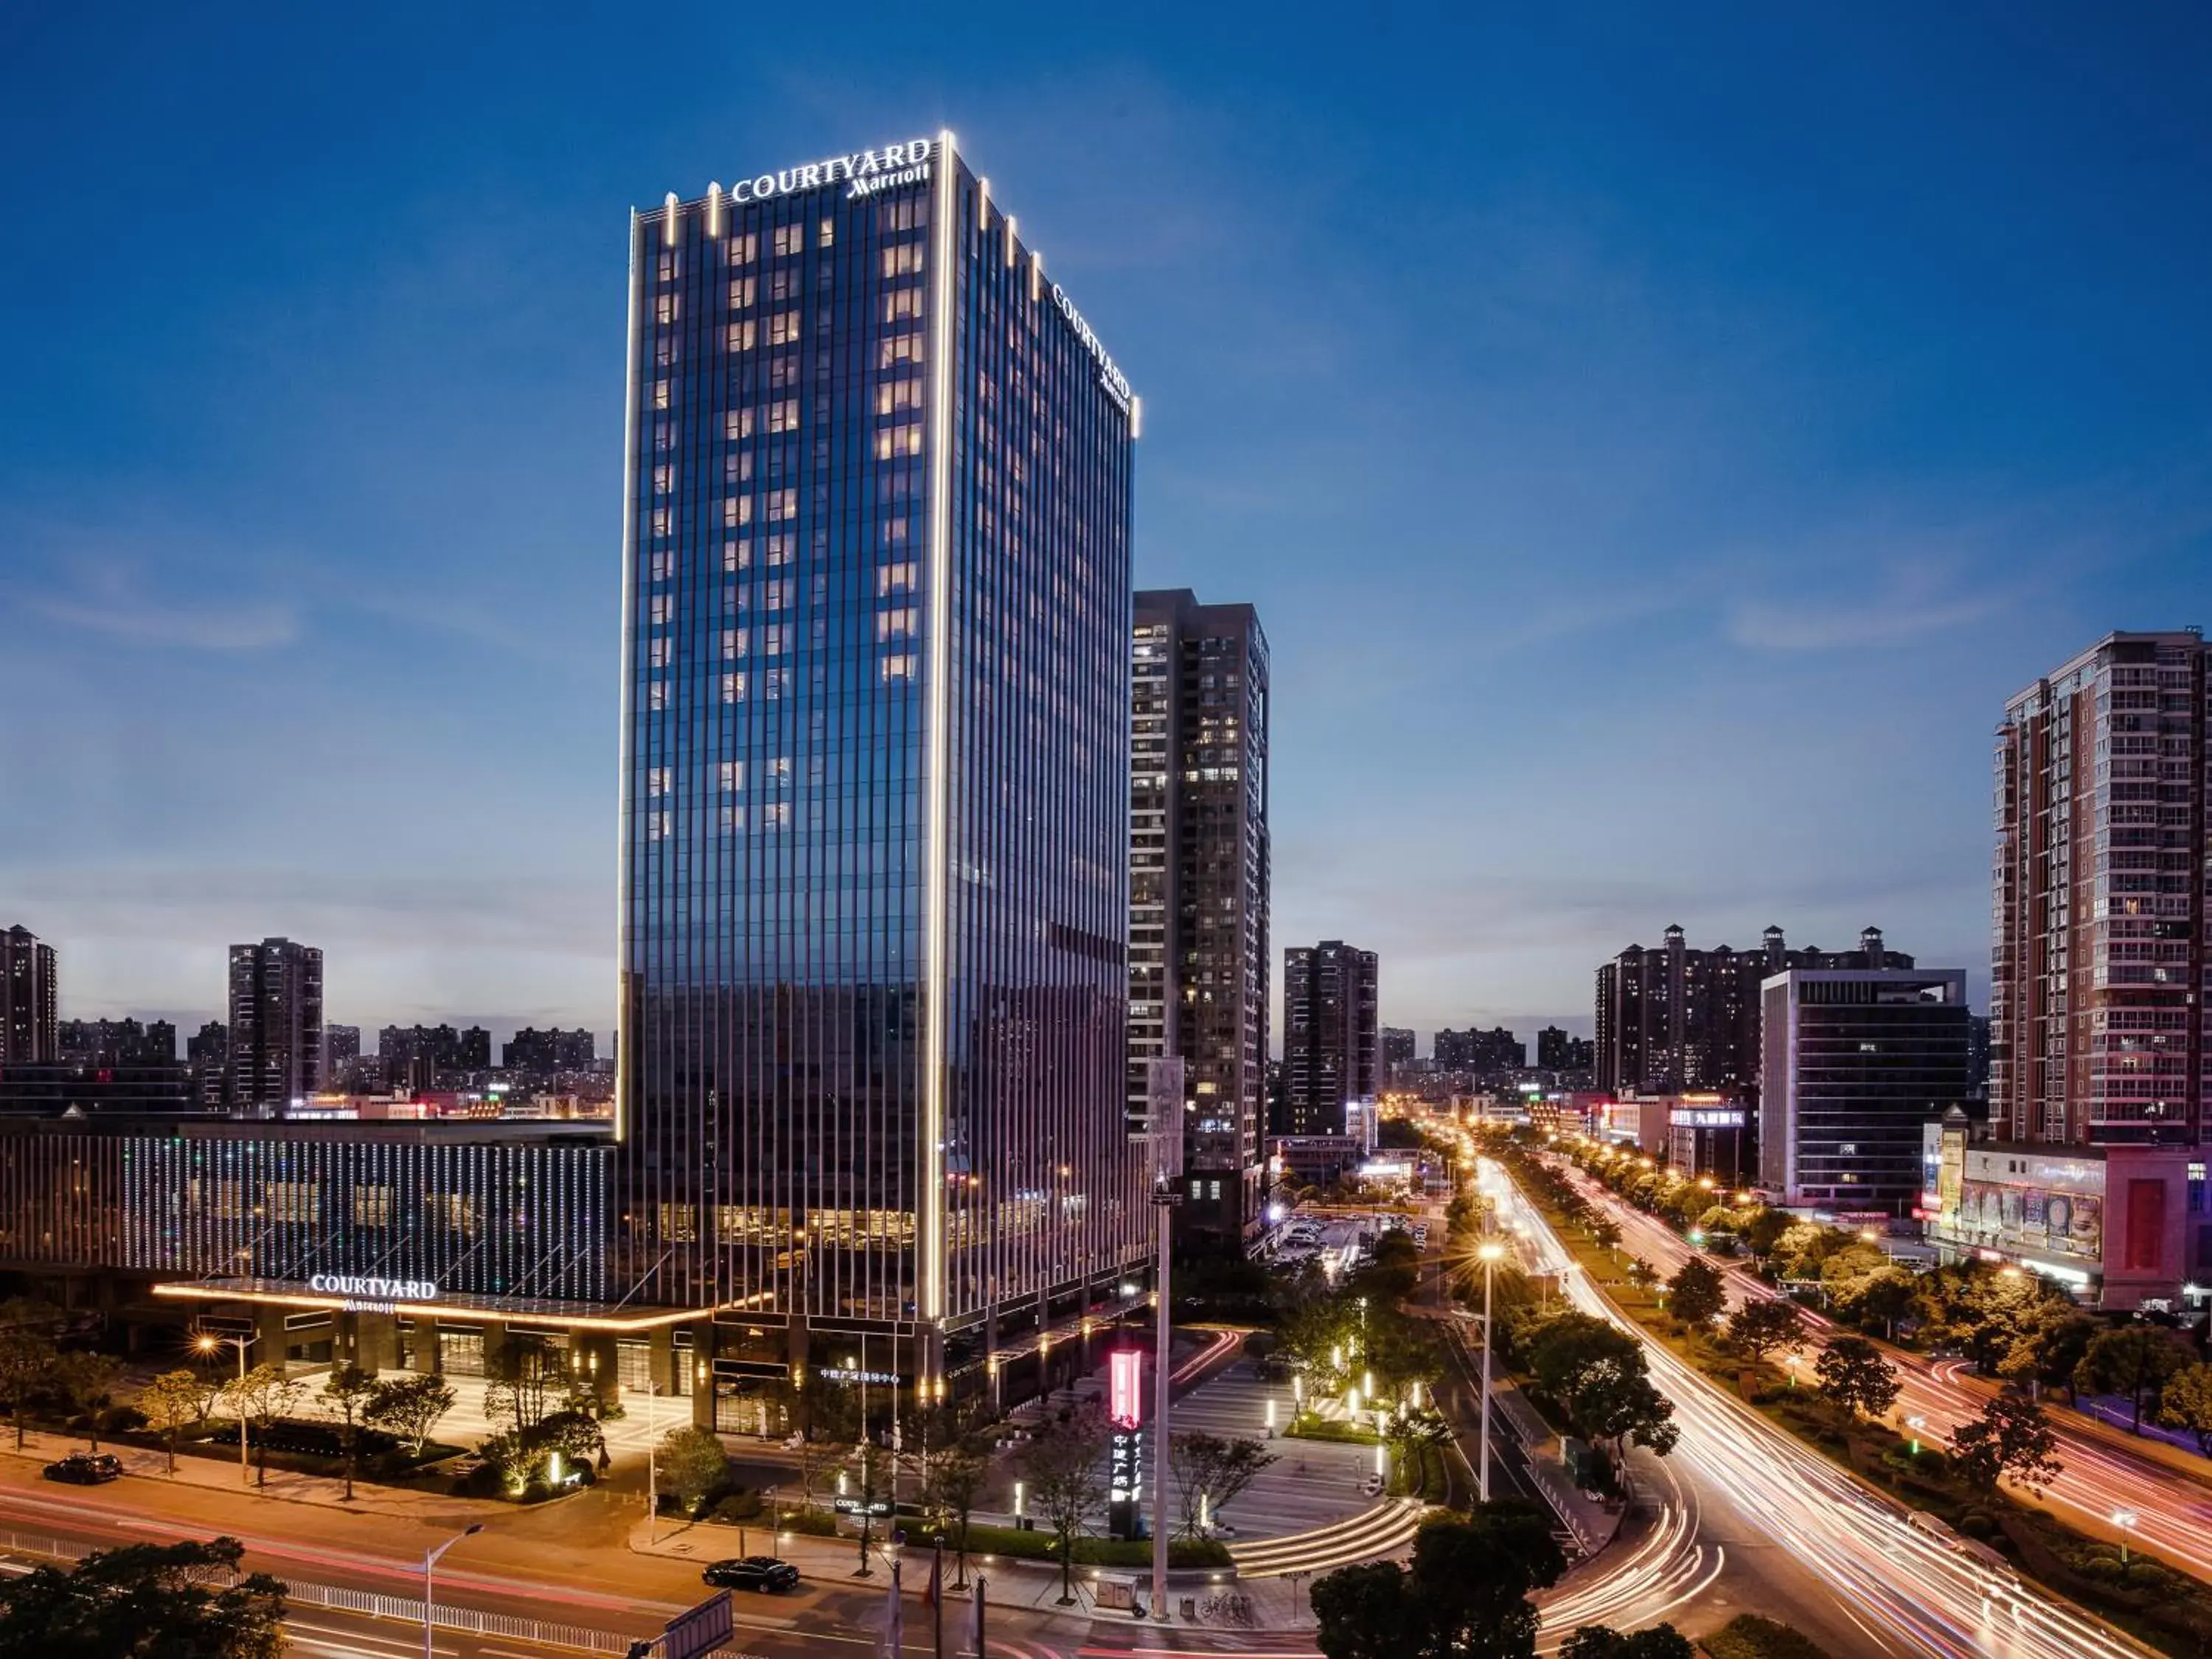 Property building in Courtyard by Marriott Changsha South